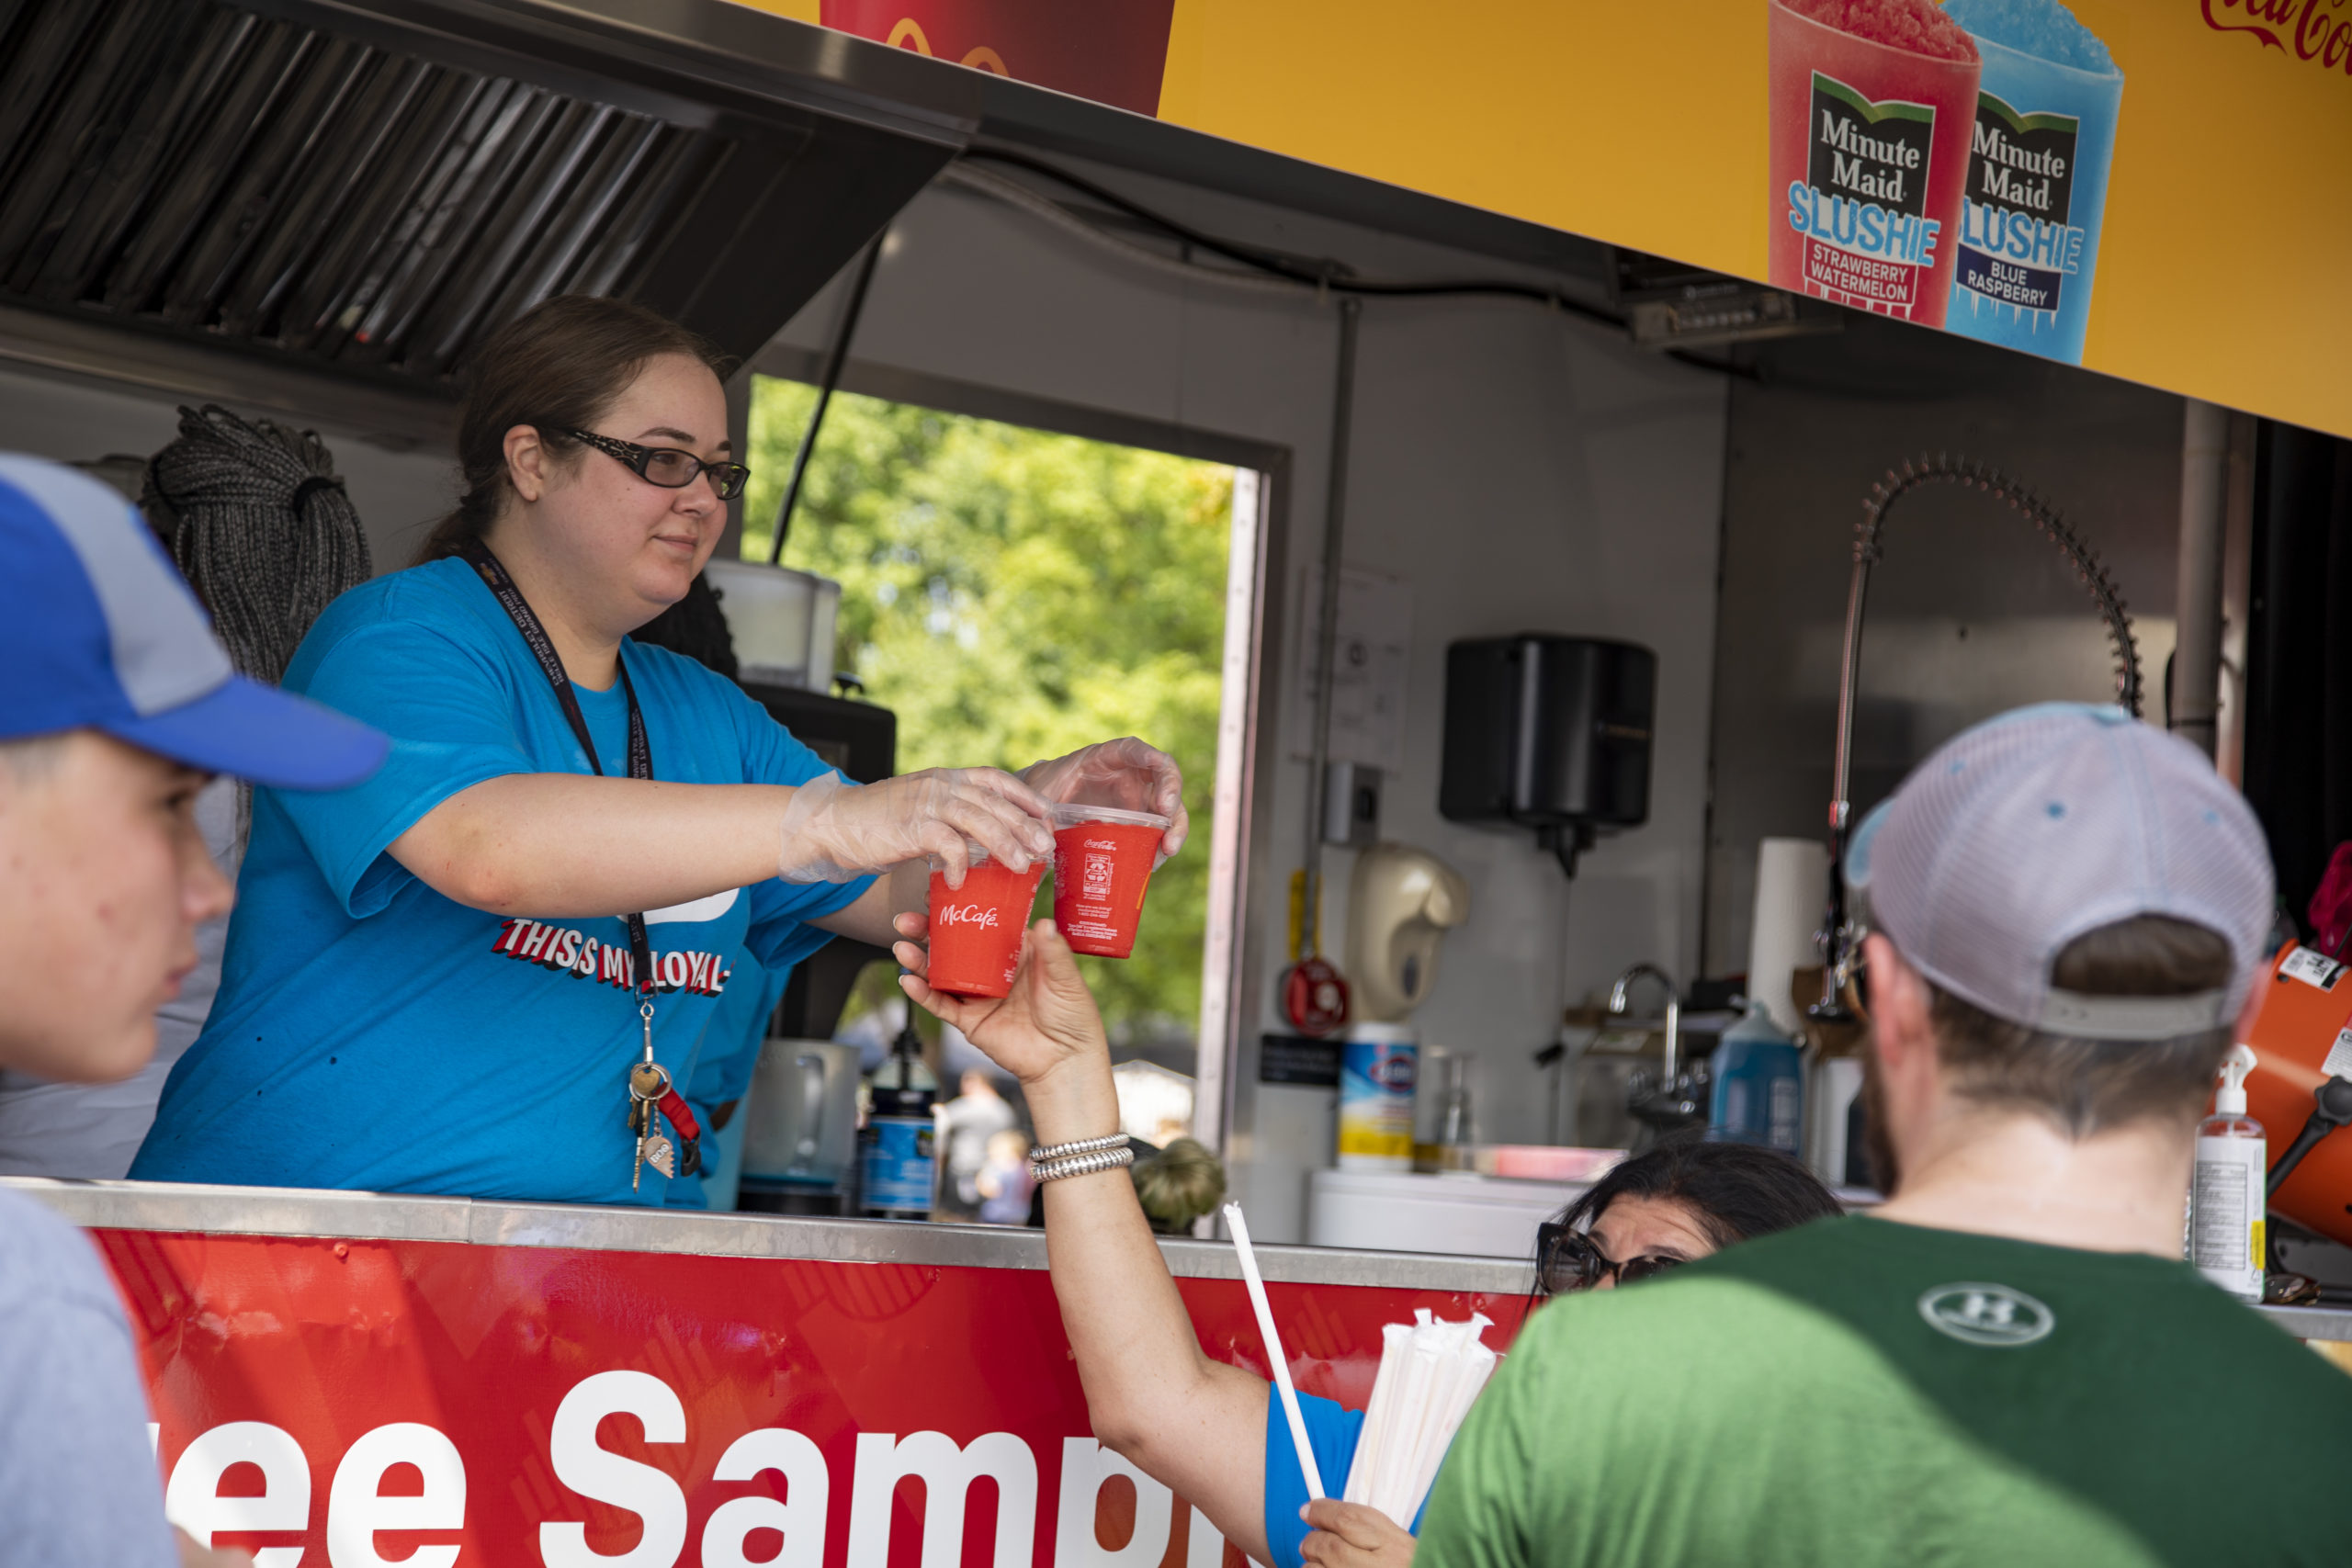 Woman in snack truck passing drinks to customers